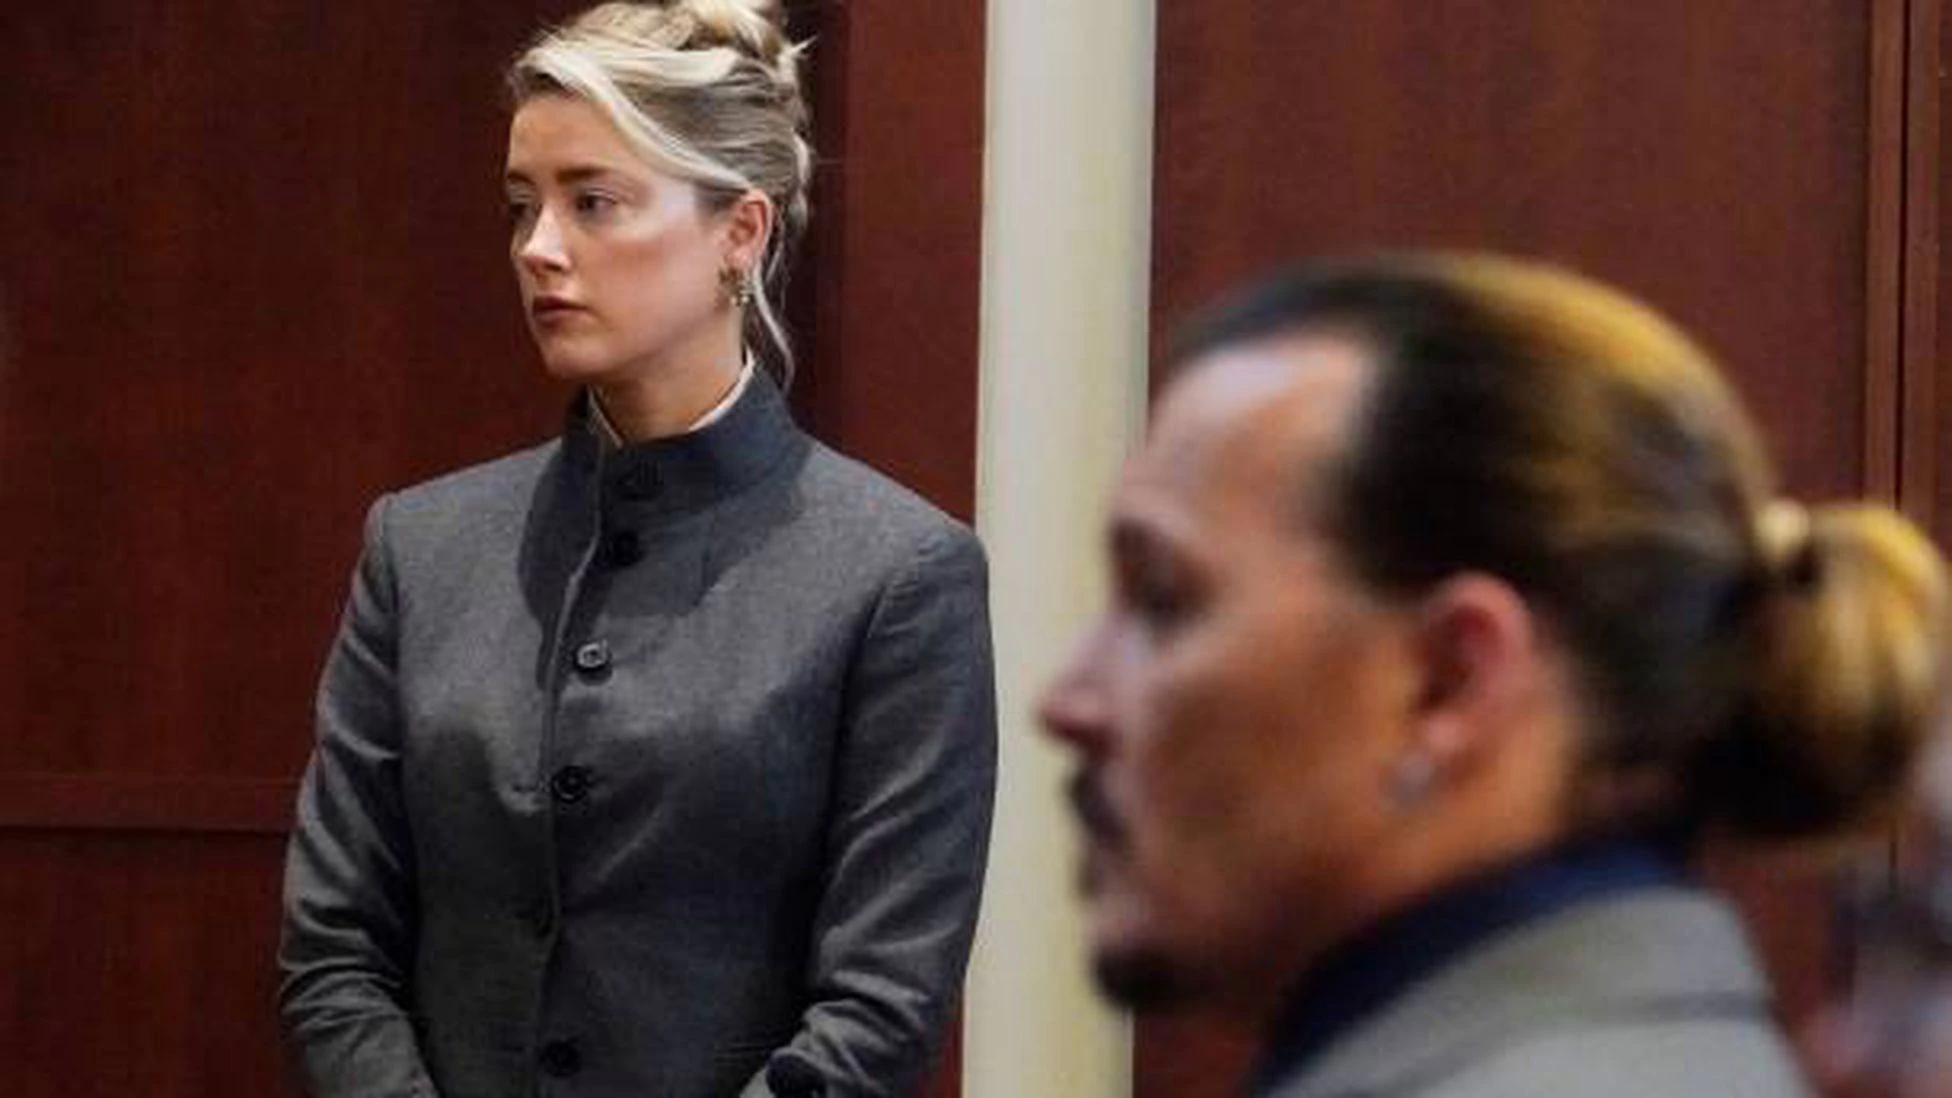 Amber and Johnny in court